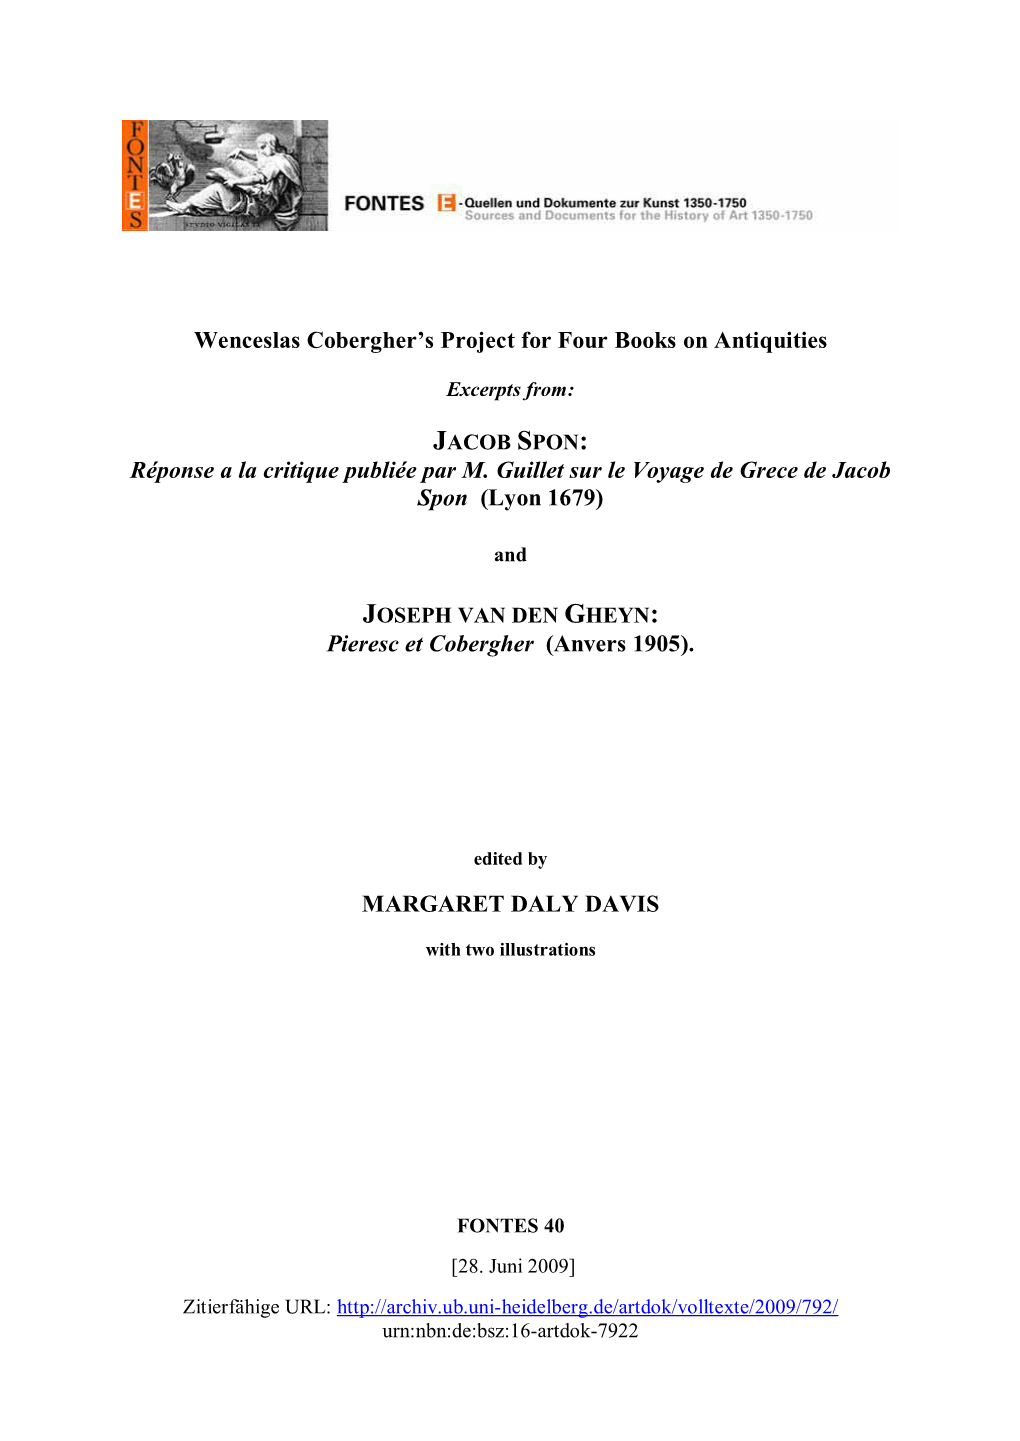 Wenceslas Cobergher's Project for Four Books on Antiquities Réponse